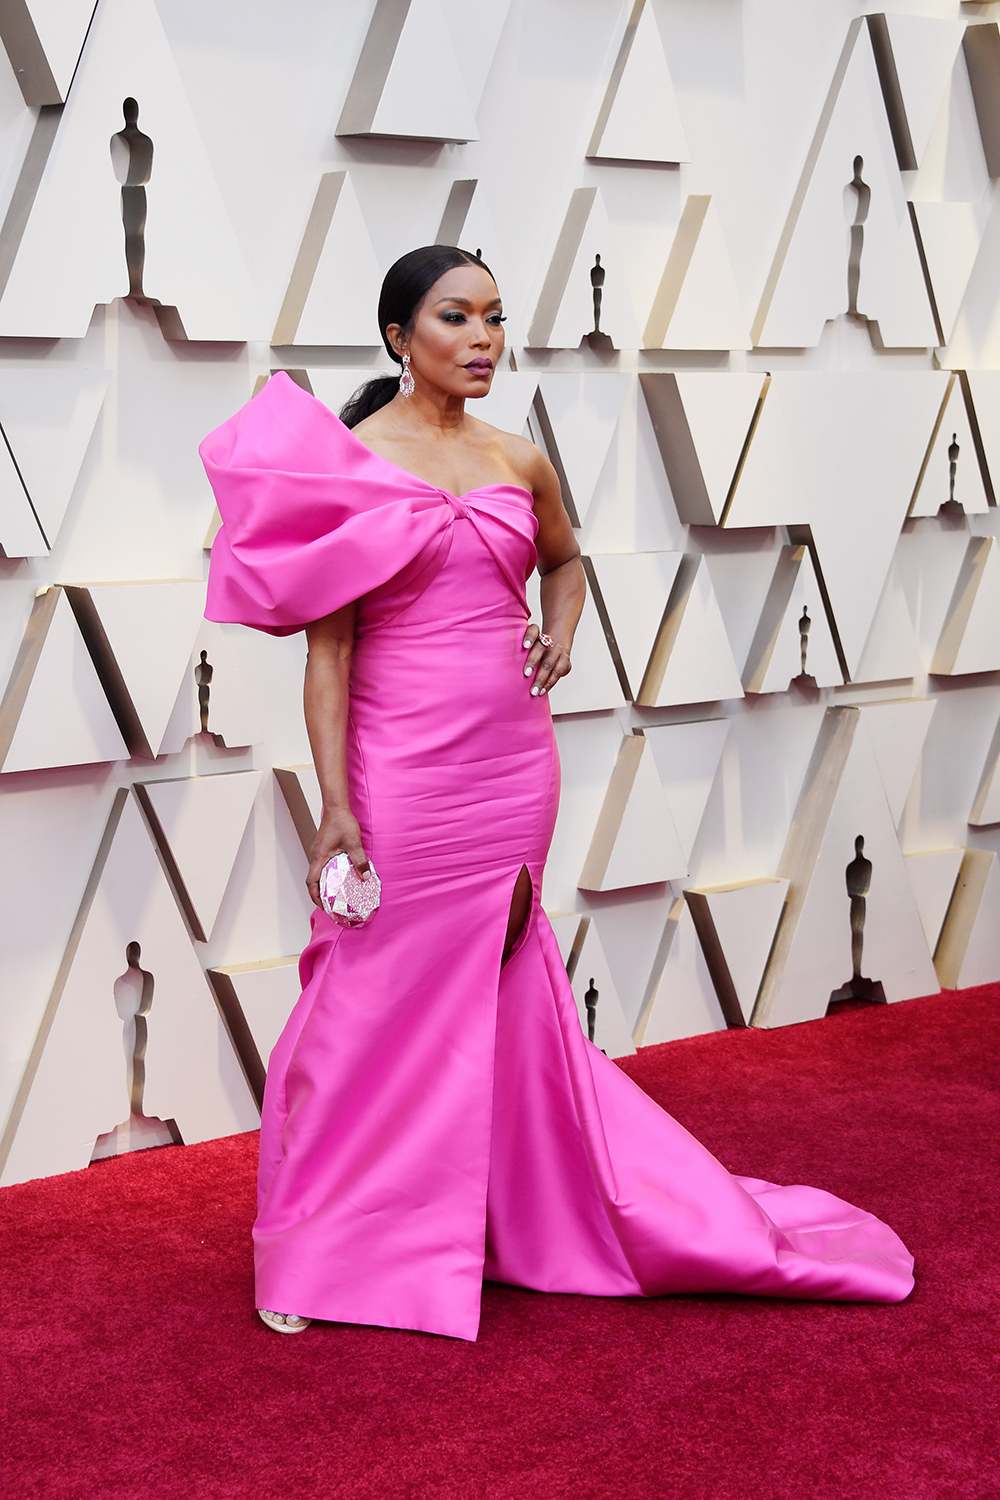 HOLLYWOOD, CALIFORNIA - FEBRUARY 24: Angela Bassett attends the 91st Annual Academy Awards at Hollywood and Highland on February 24, 2019 in Hollywood, California. (Photo by Frazer Harrison/Getty Images)